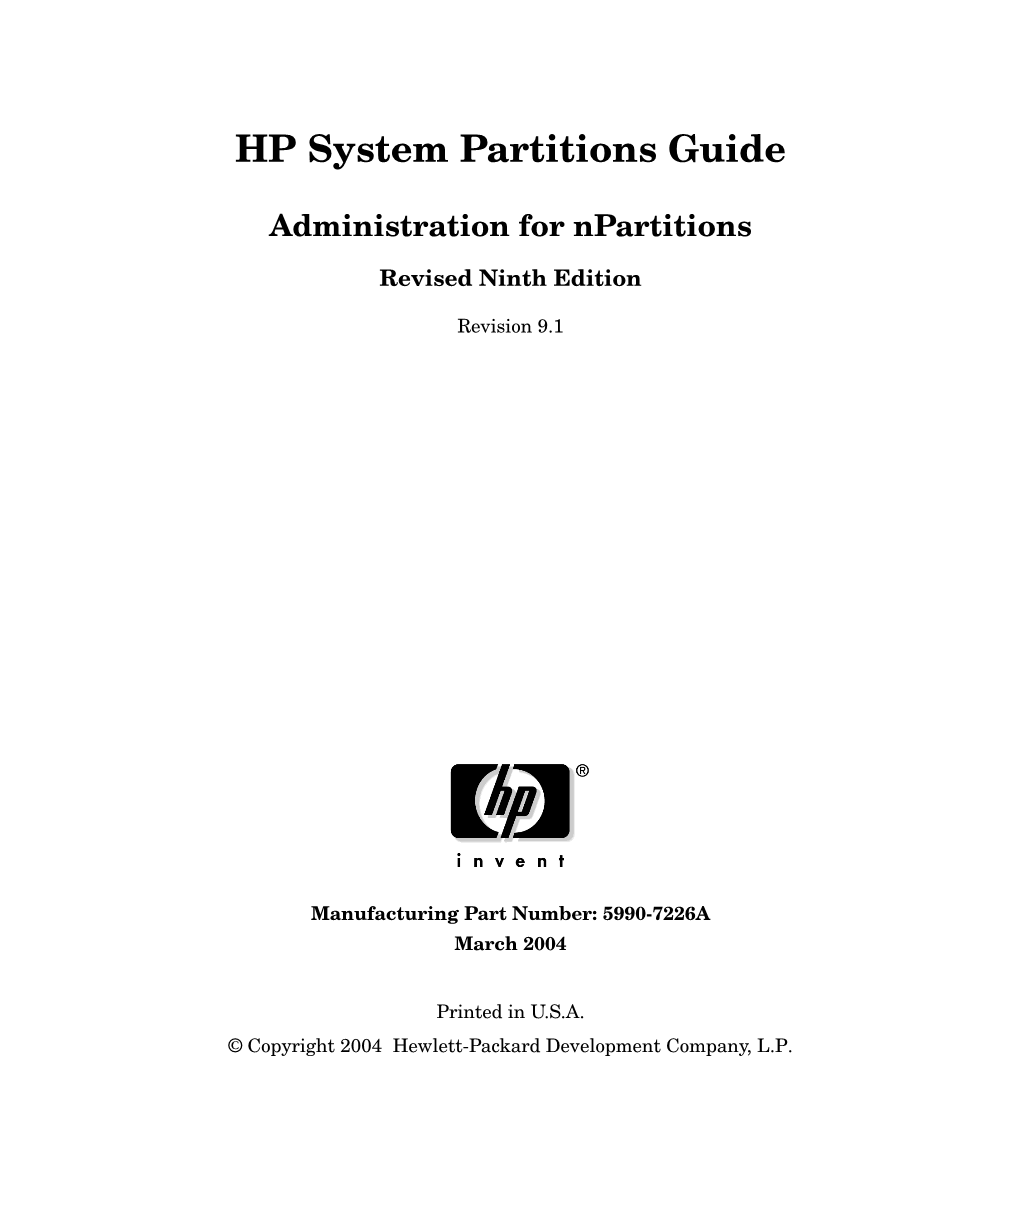 HP System Partitions Guide